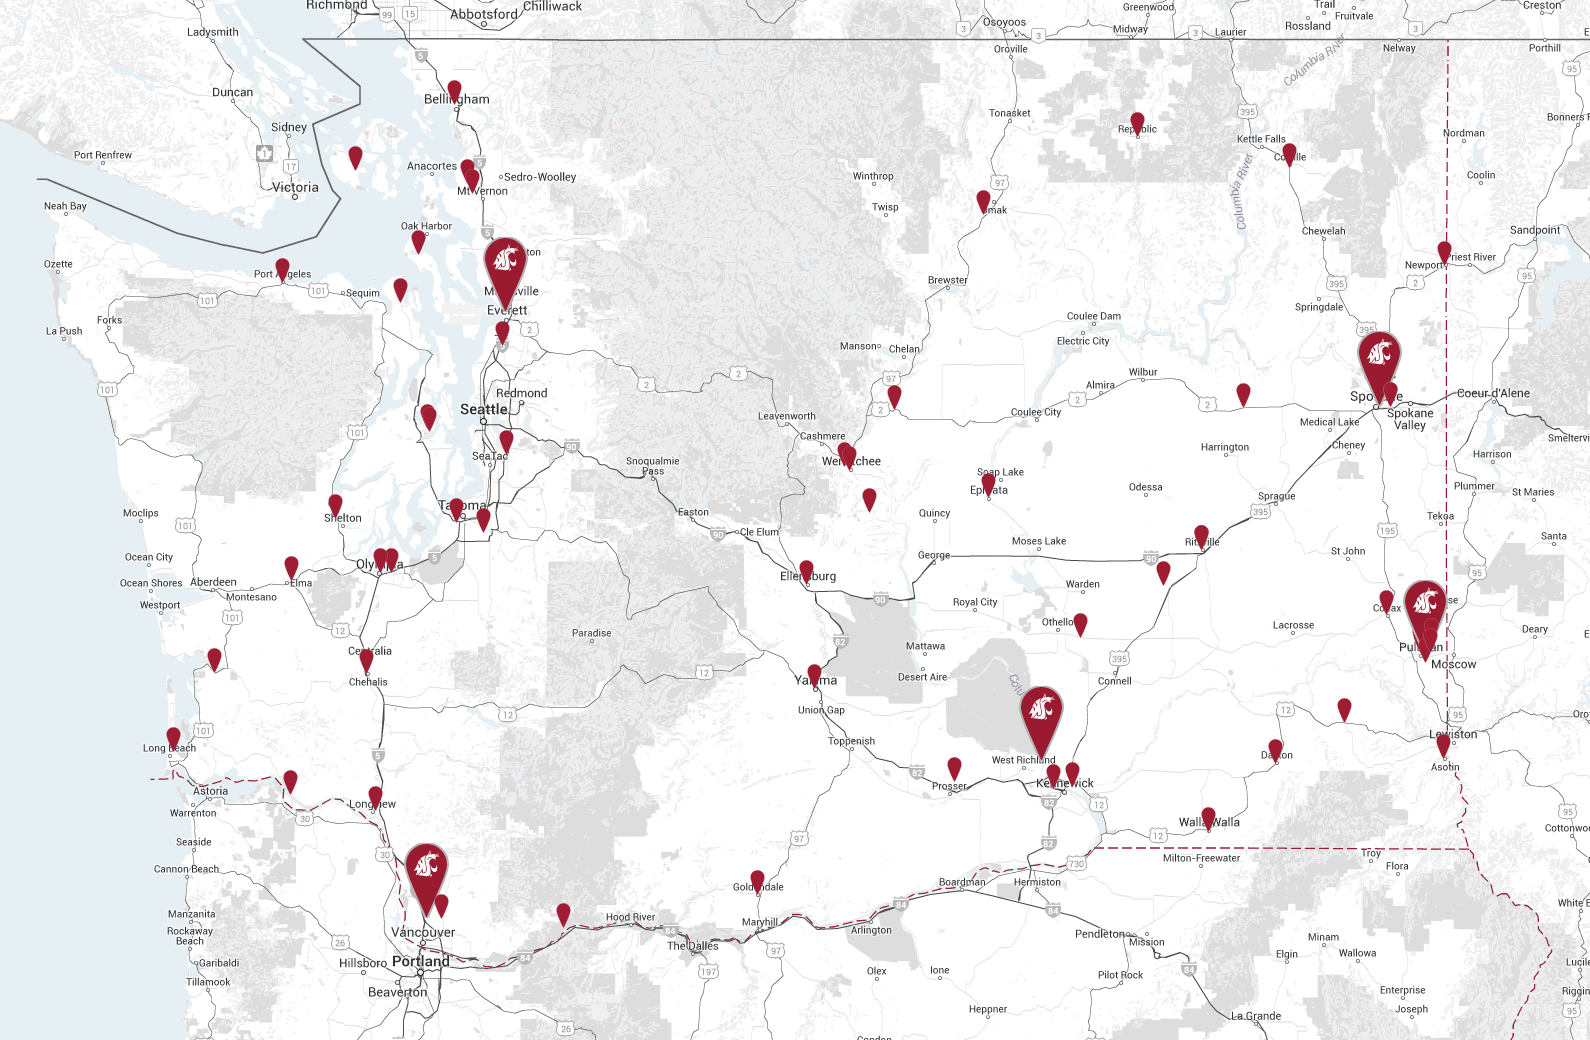 A map of Washington State showing icons indicating WSU locations all over the state.